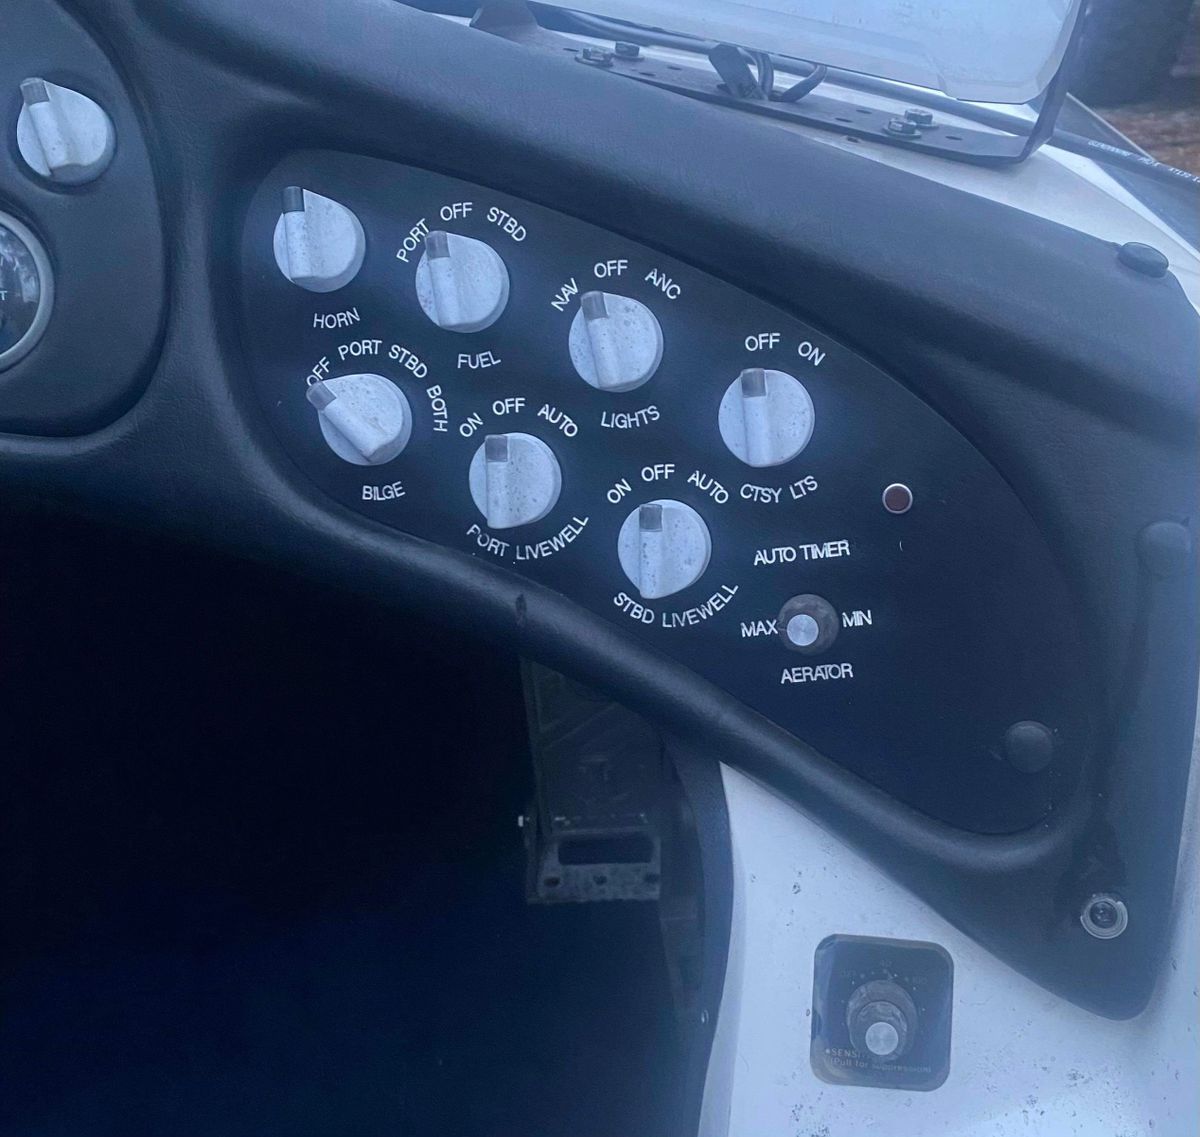 Skeeter ZX “Round Style” switch panel (6&7 switch options)